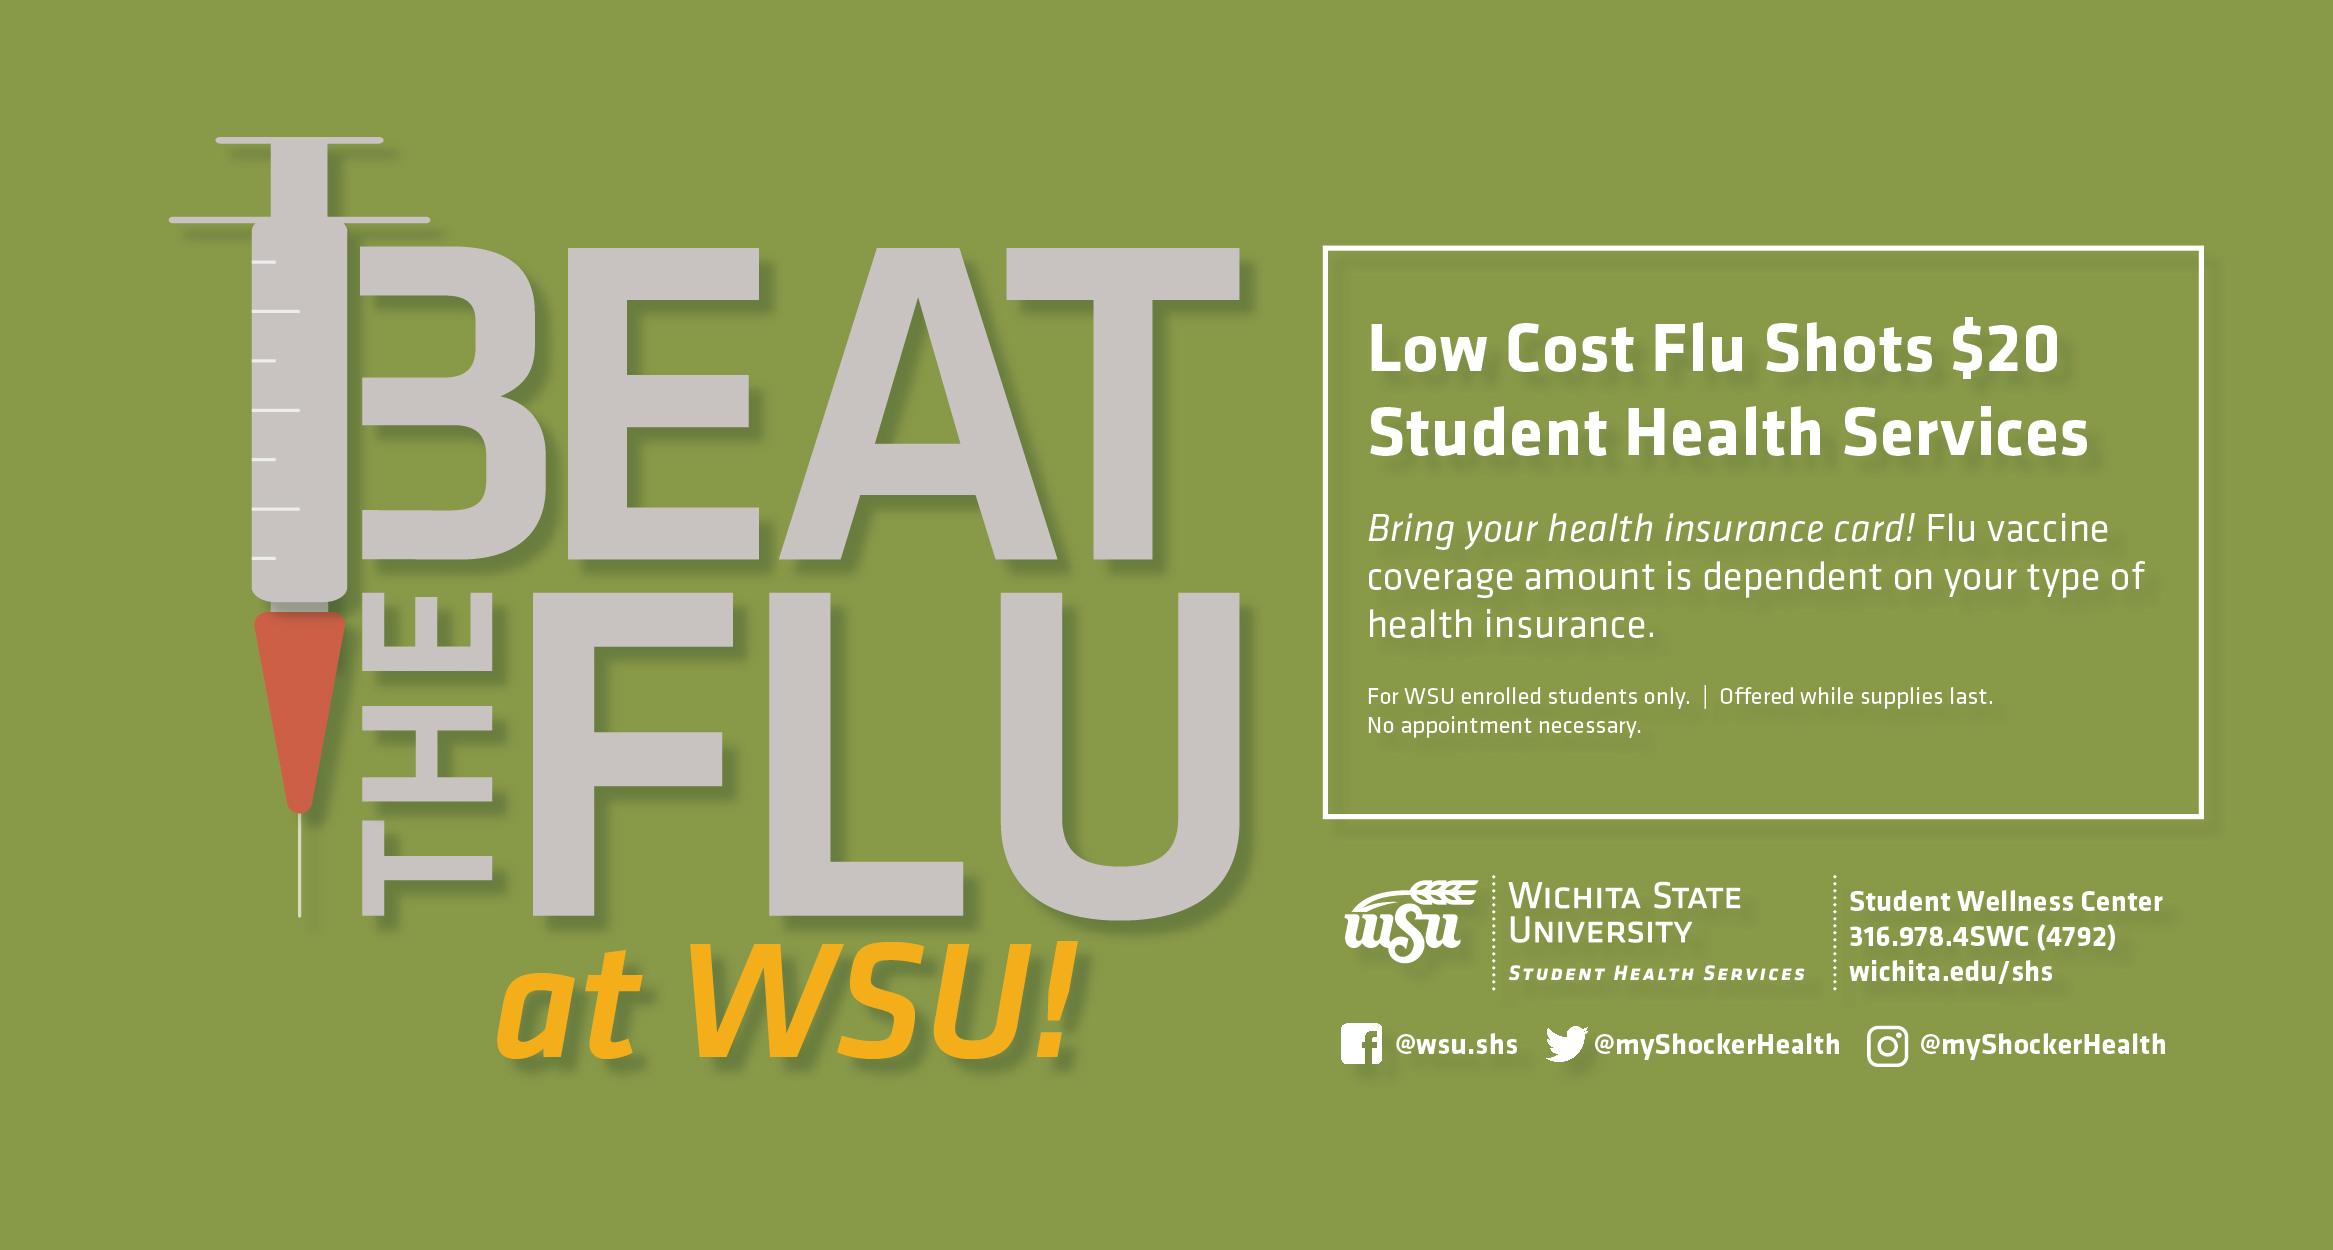 Student Health Services offering Flu Shots